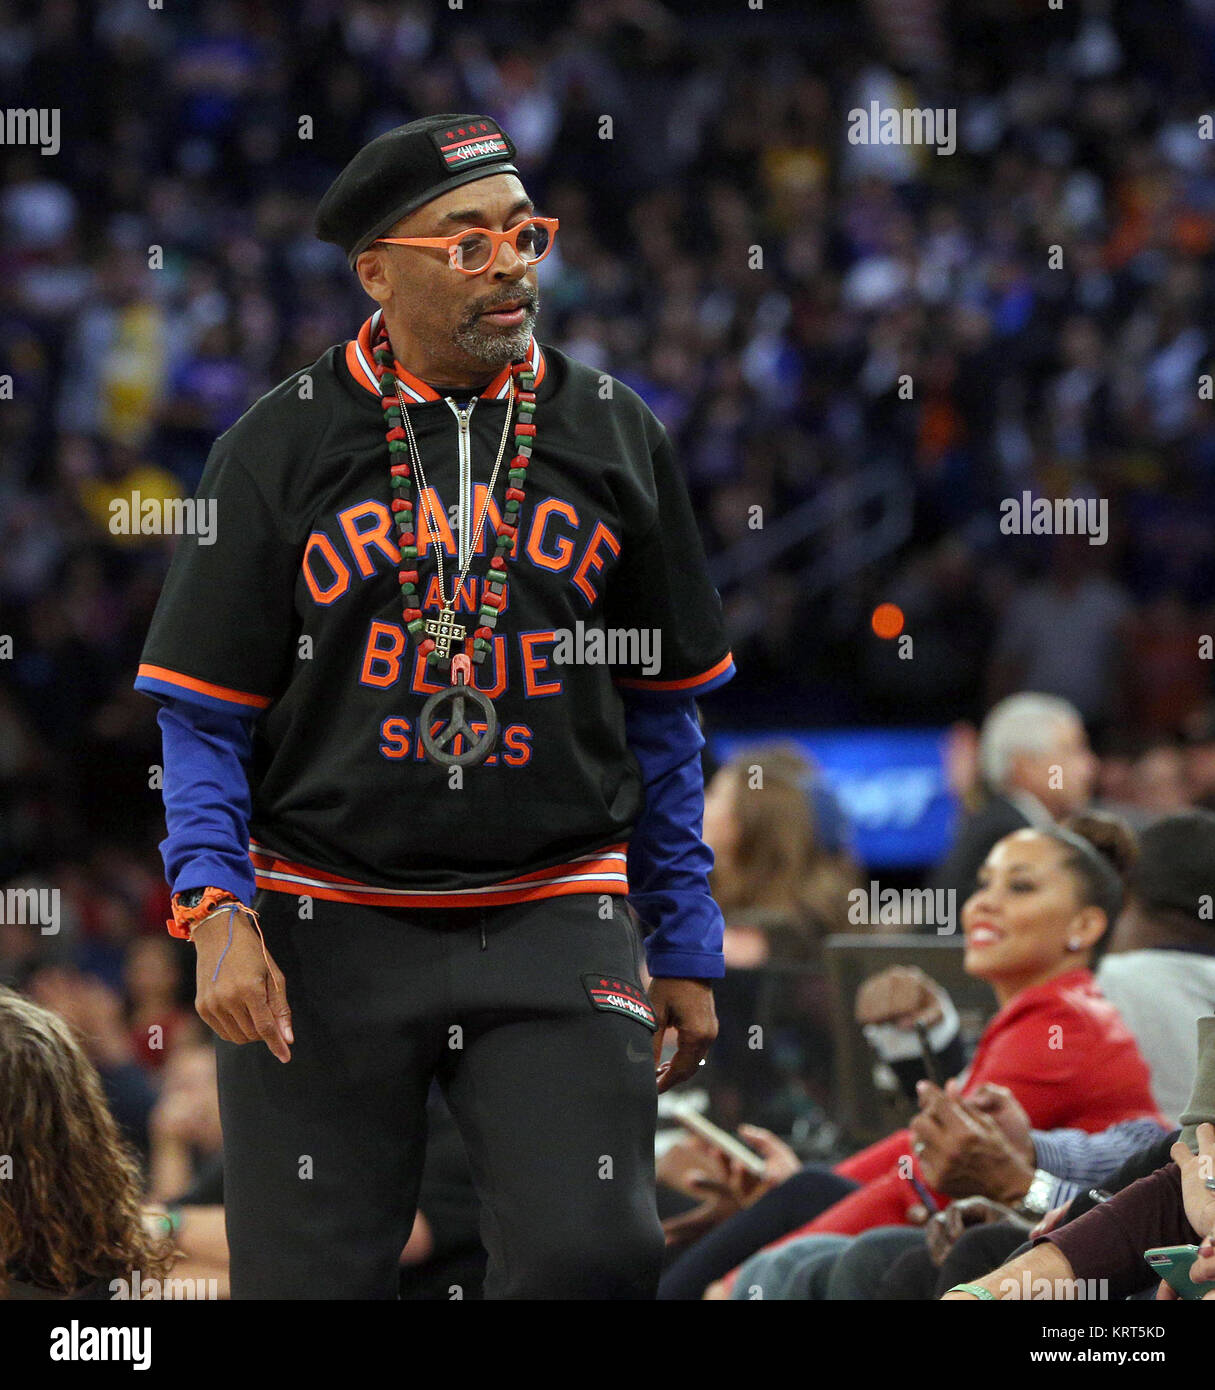 NEW YORK, NY - NOVEMBER 08: (Embargoed till November 10, 2015) Magic Johnson, Tracy Morgan with wife Megan Wollover sit with Michael K. Williams and  Director Spike Lee at the New York Knicks vs Los Angeles Lakers game at Madison Square Garden on November 8, 2015 in New York City.   People:  Spike Lee Stock Photo